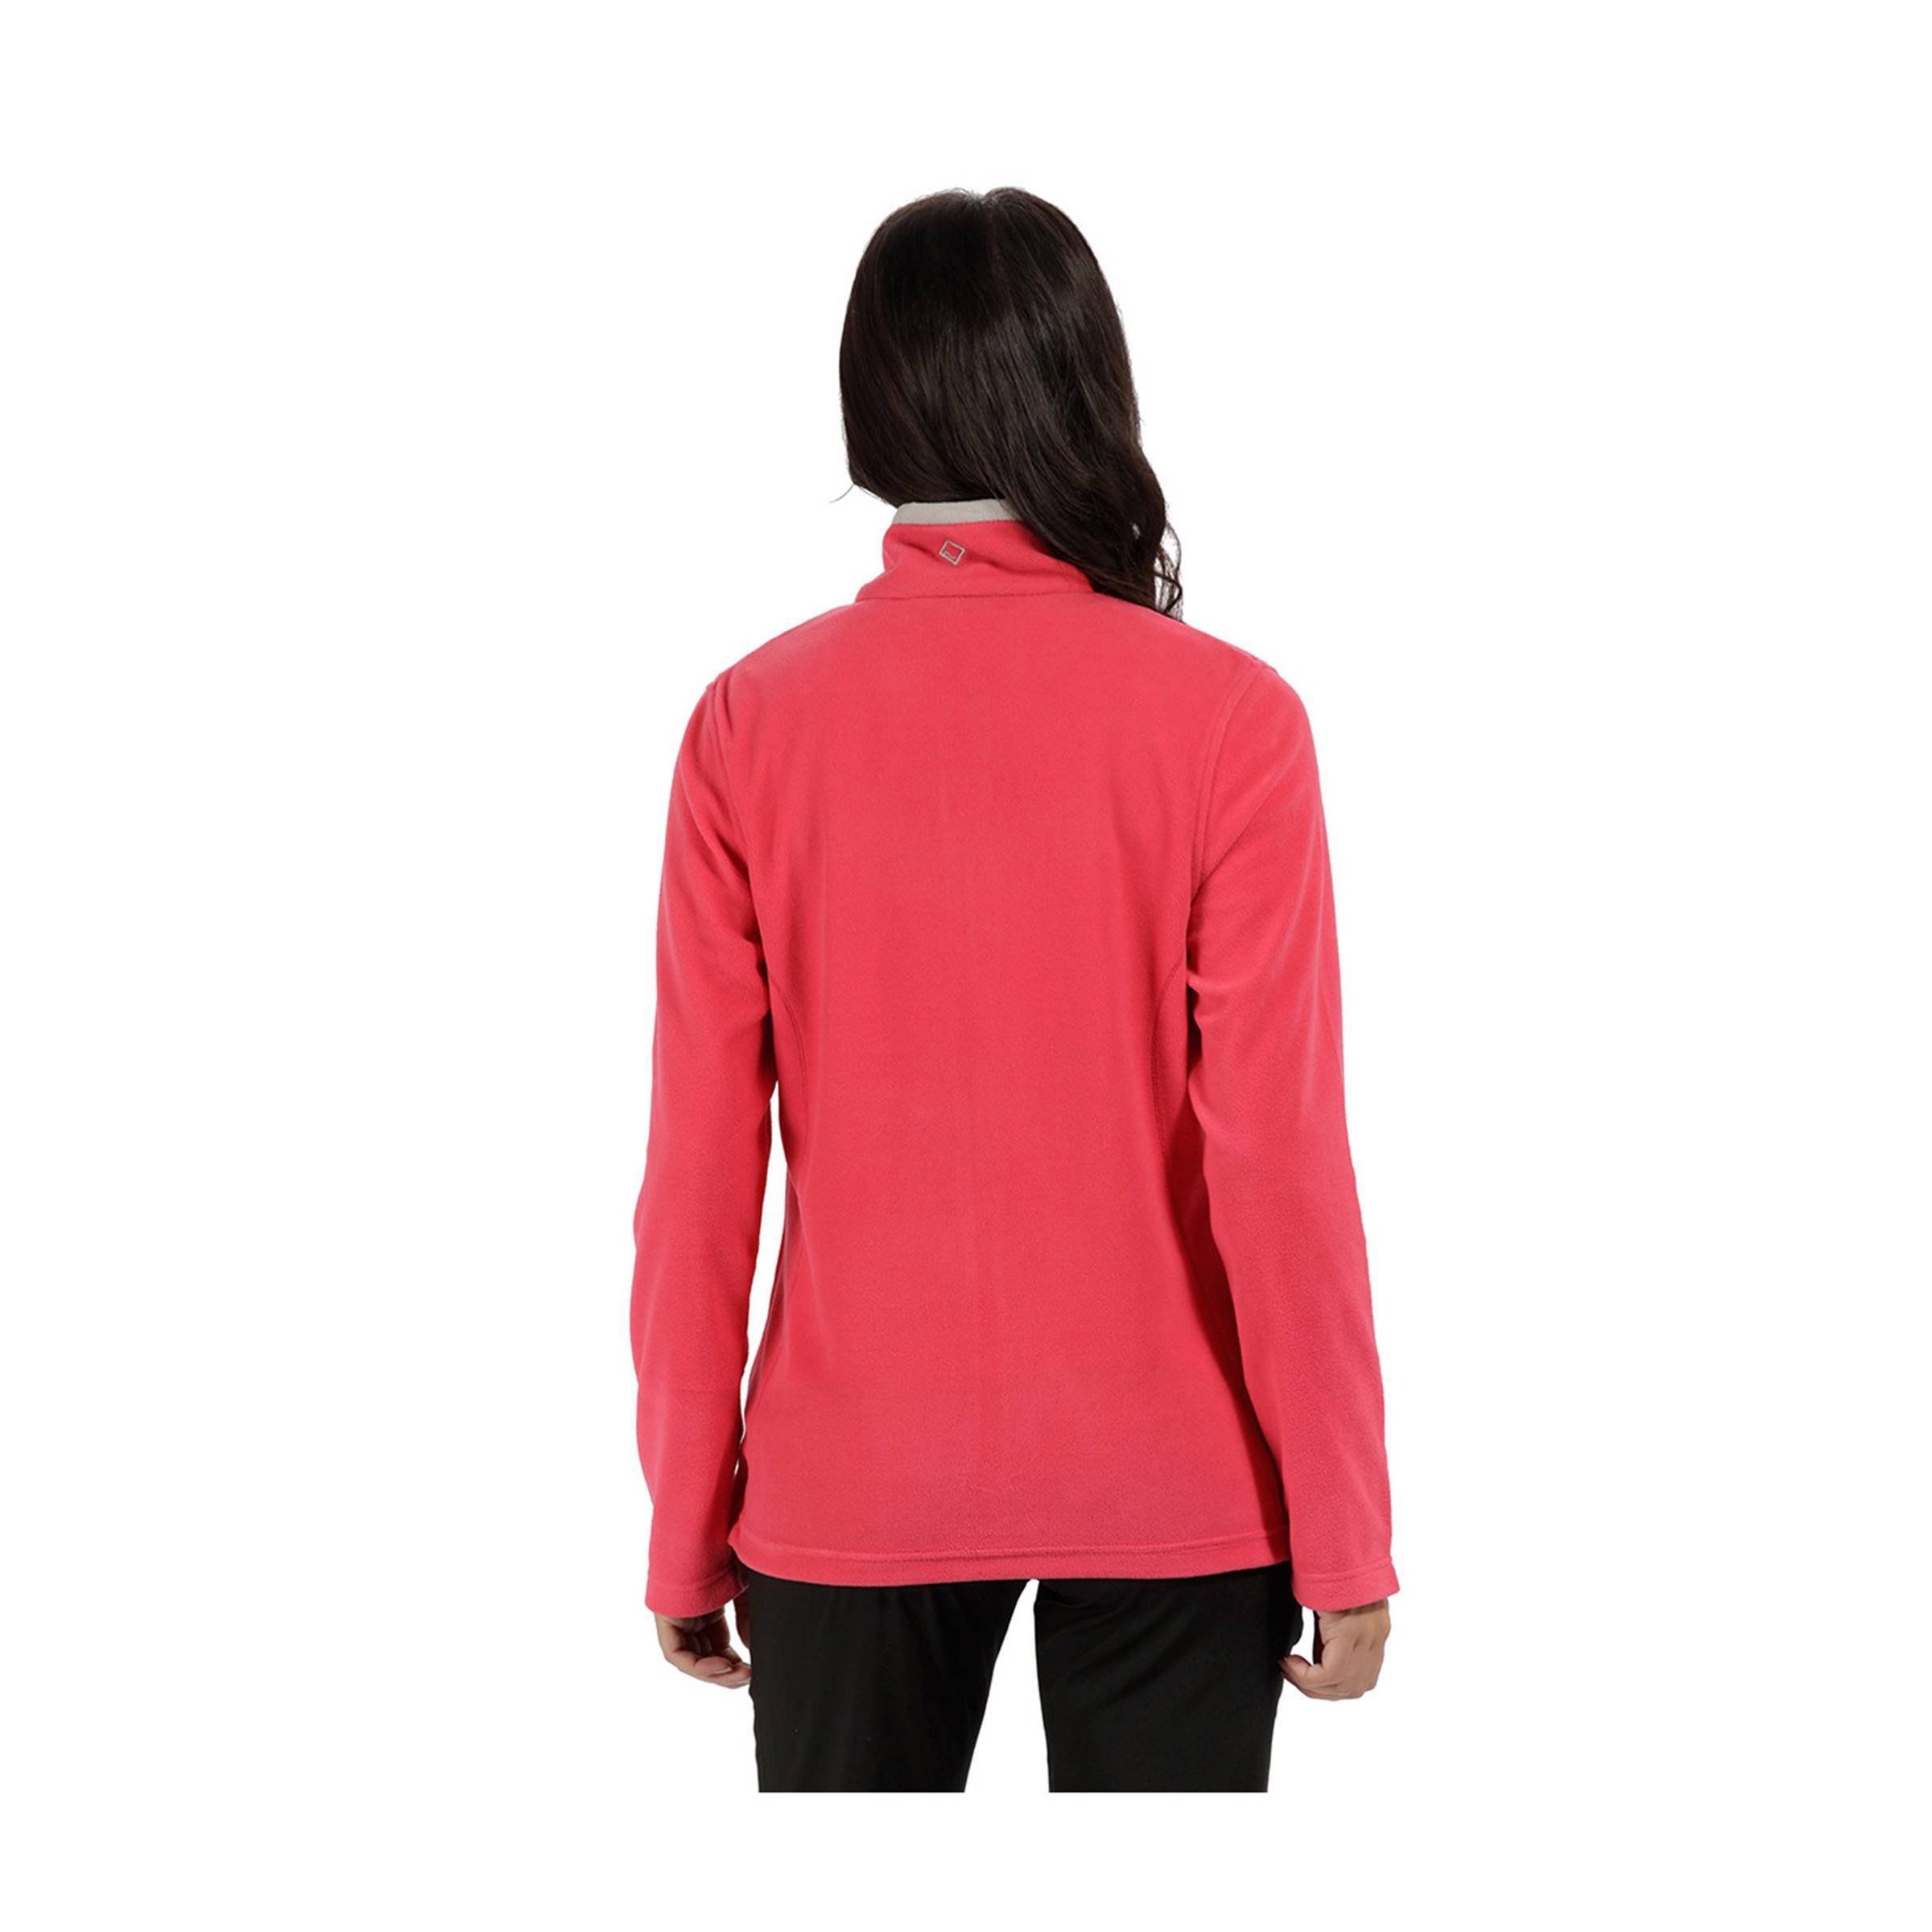 The womens Clemance II is our incredibly soft and warm mid-weight Symmetry fleece jacket cut with flattering curved seams and a colour pop detail around the neck. Contrasting inner collar with brightly coloured stripe. It has a shock cord hem to seal in the warmth. It works equally well as a stand-alone on milder days or layered under mountain jackets in winter months. 100% Polyester. Regatta Womens sizing (bust approx): 6 (30in/76cm), 8 (32in/81cm), 10 (34in/86cm), 12 (36in/92cm), 14 (38in/97cm), 16 (40in/102cm), 18 (43in/109cm), 20 (45in/114cm), 22 (48in/122cm), 24 (50in/127cm), 26 (52in/132cm), 28 (54in/137cm), 30 (56in/142cm), 32 (58in/147cm), 34 (60in/152cm), 36 (62in/158cm).